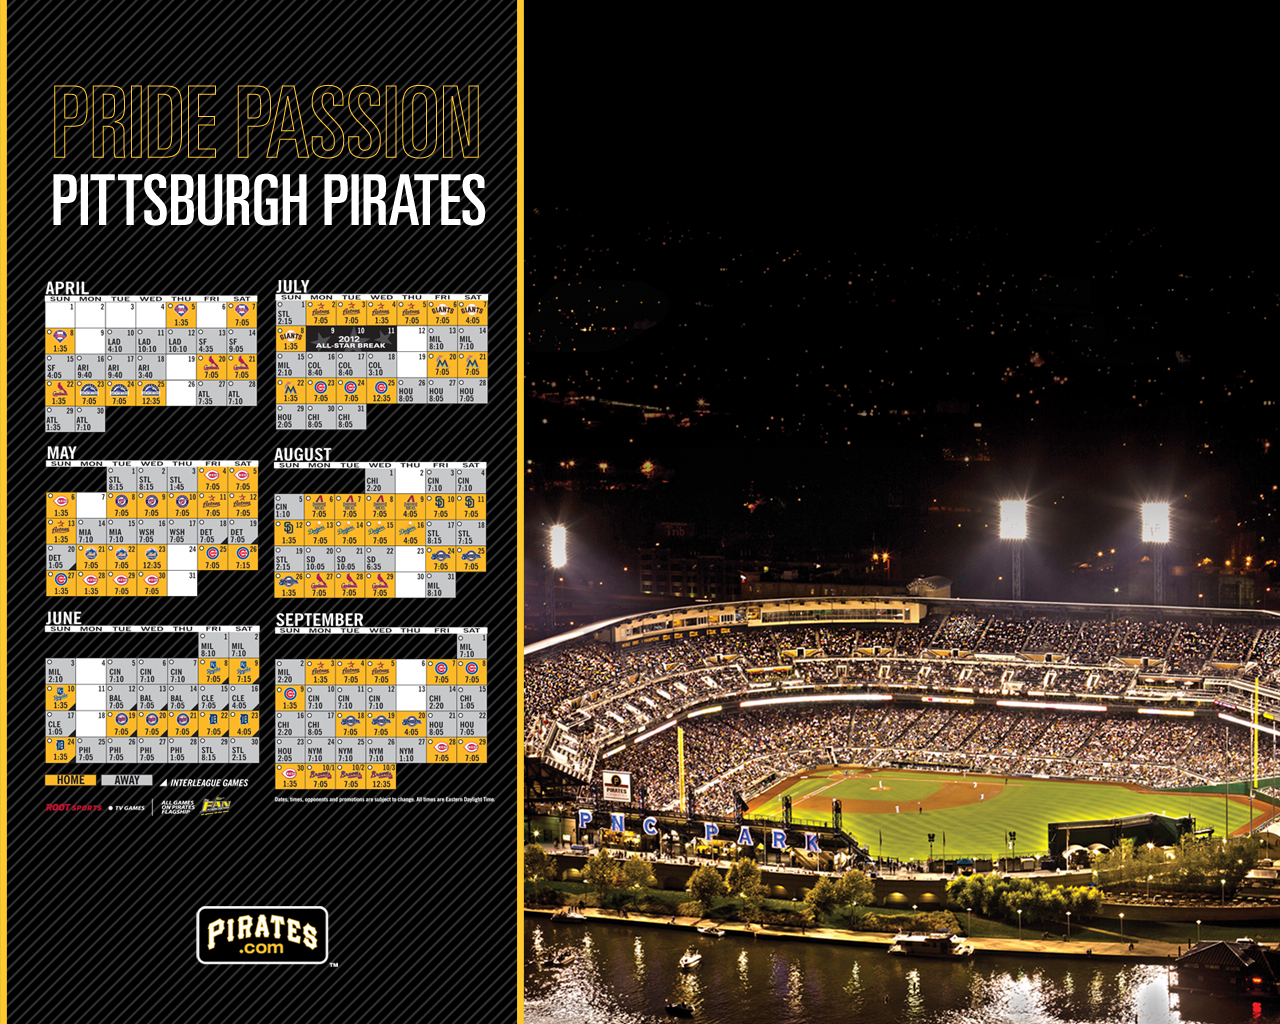 Free download Pittsburgh Pirates 2014 Schedule [1280x1024] for your